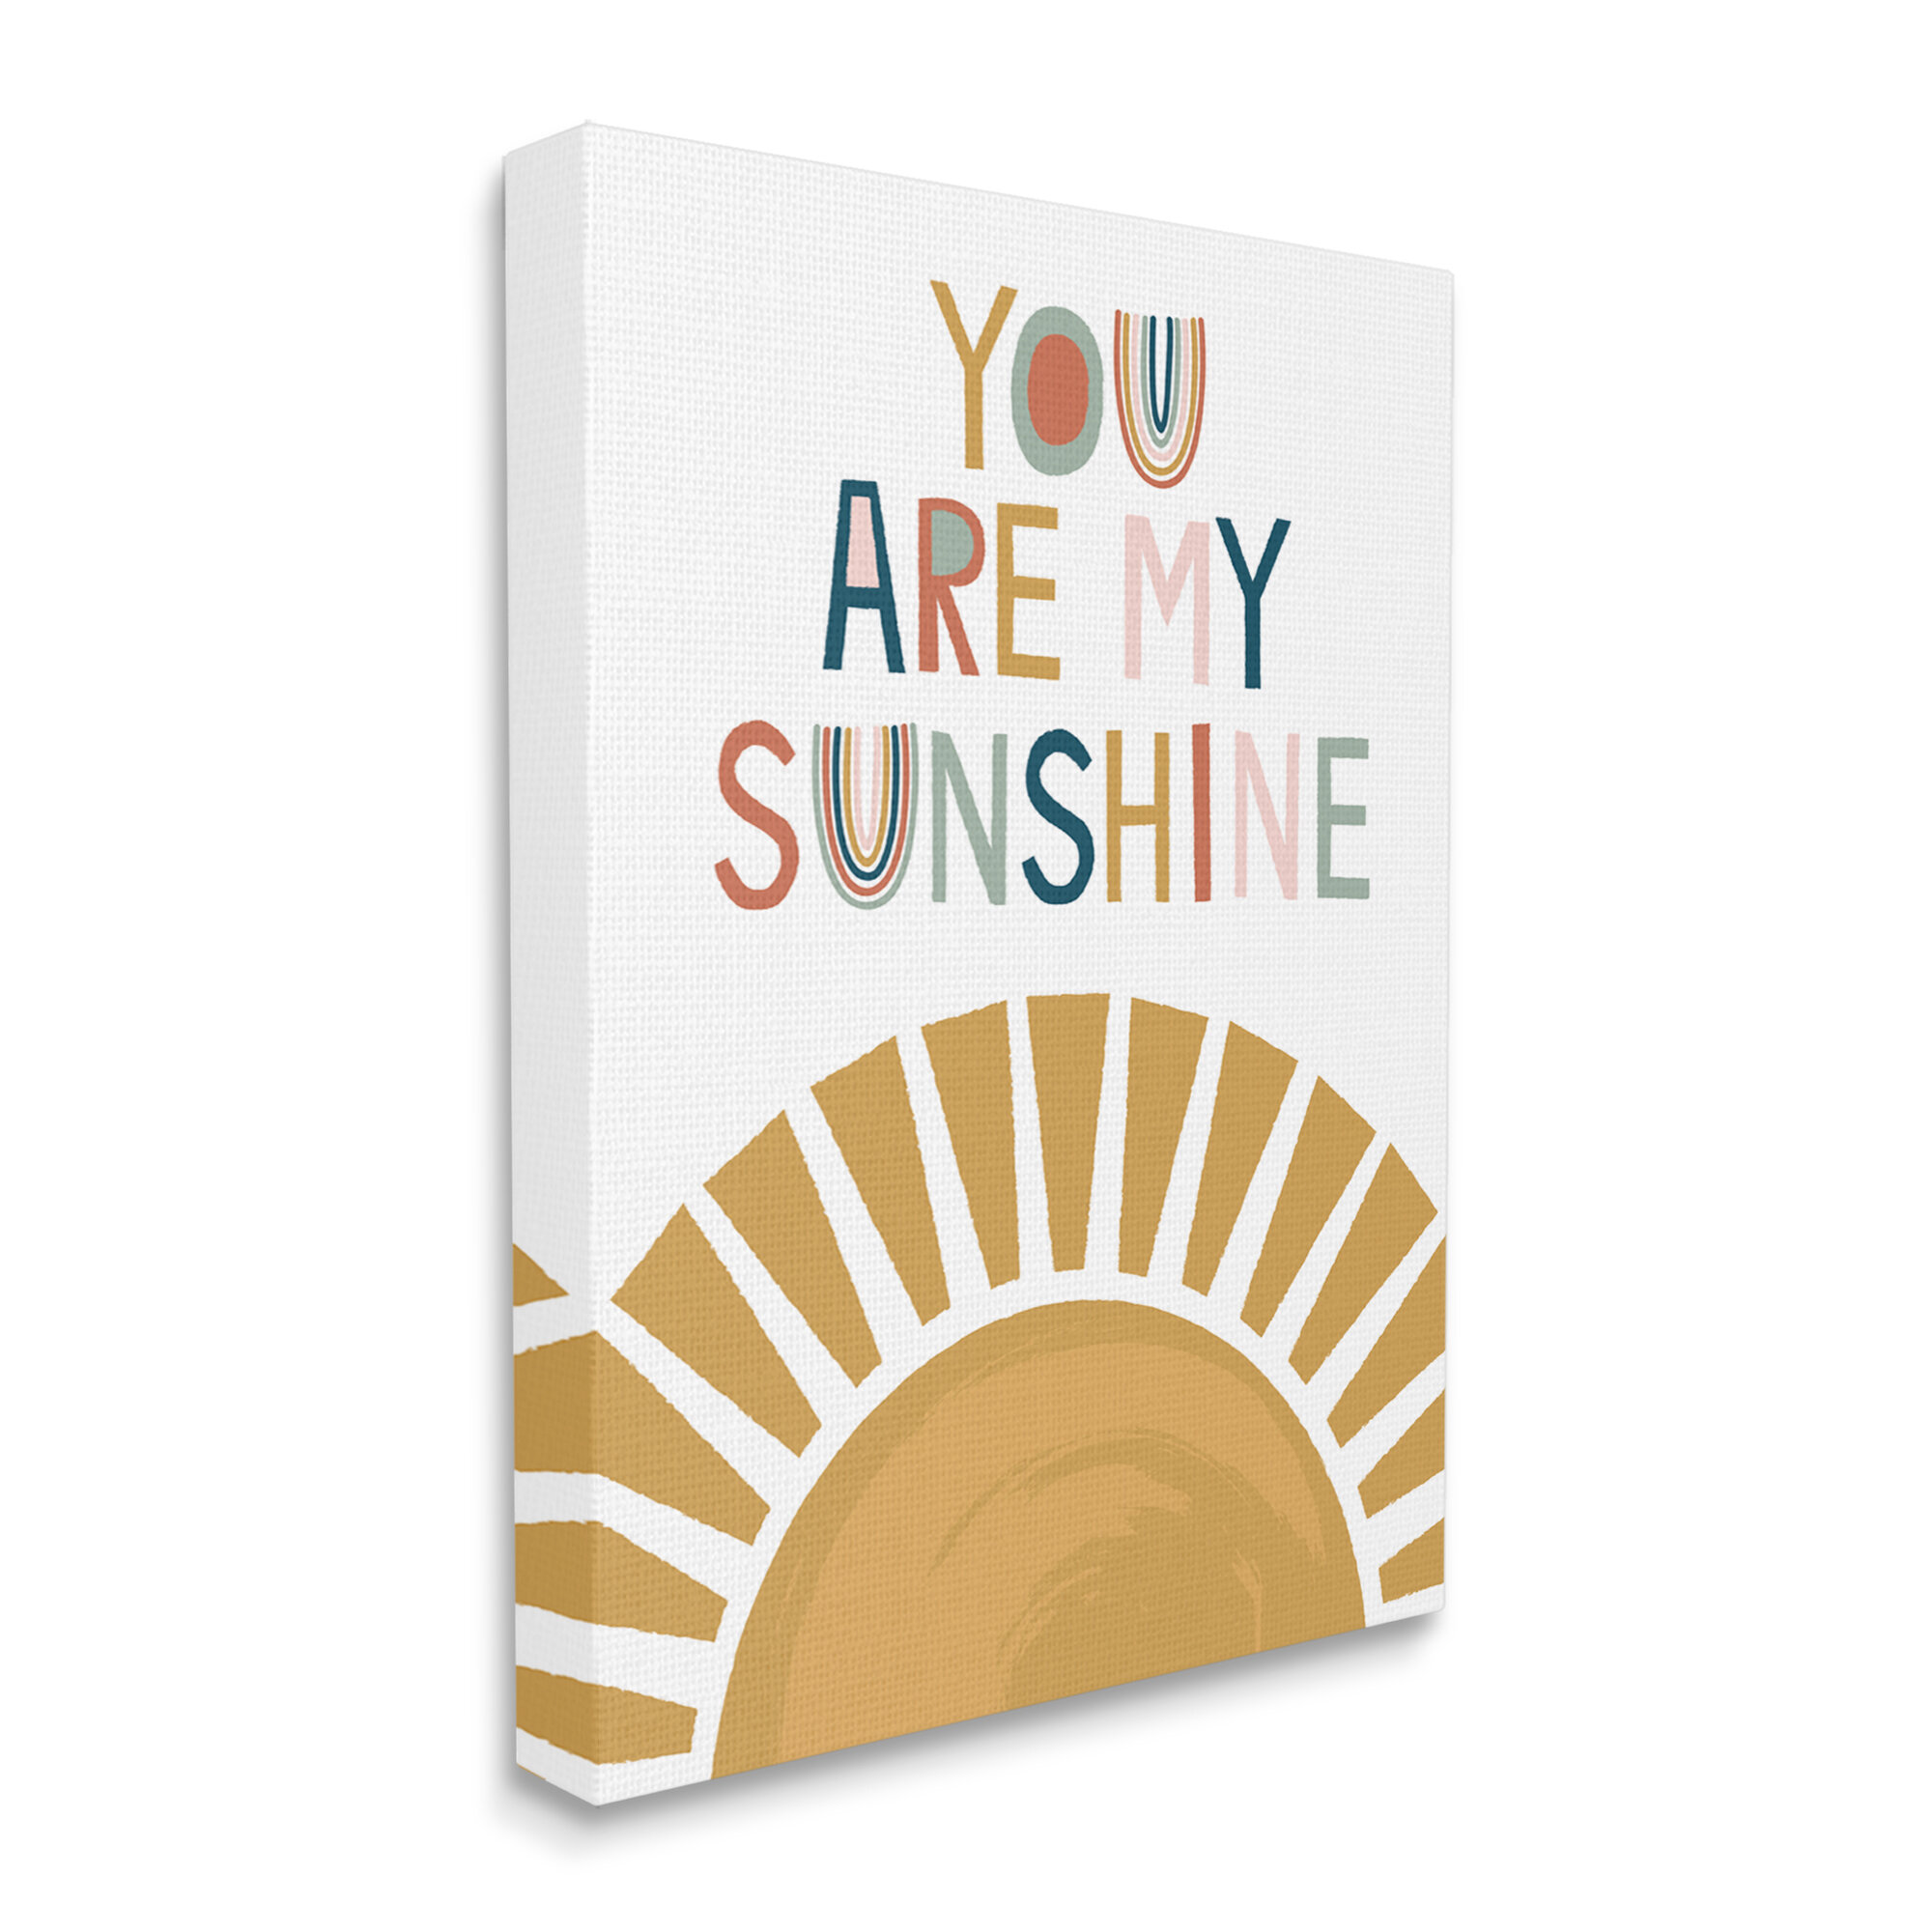 You Are My Sunshine [Book]